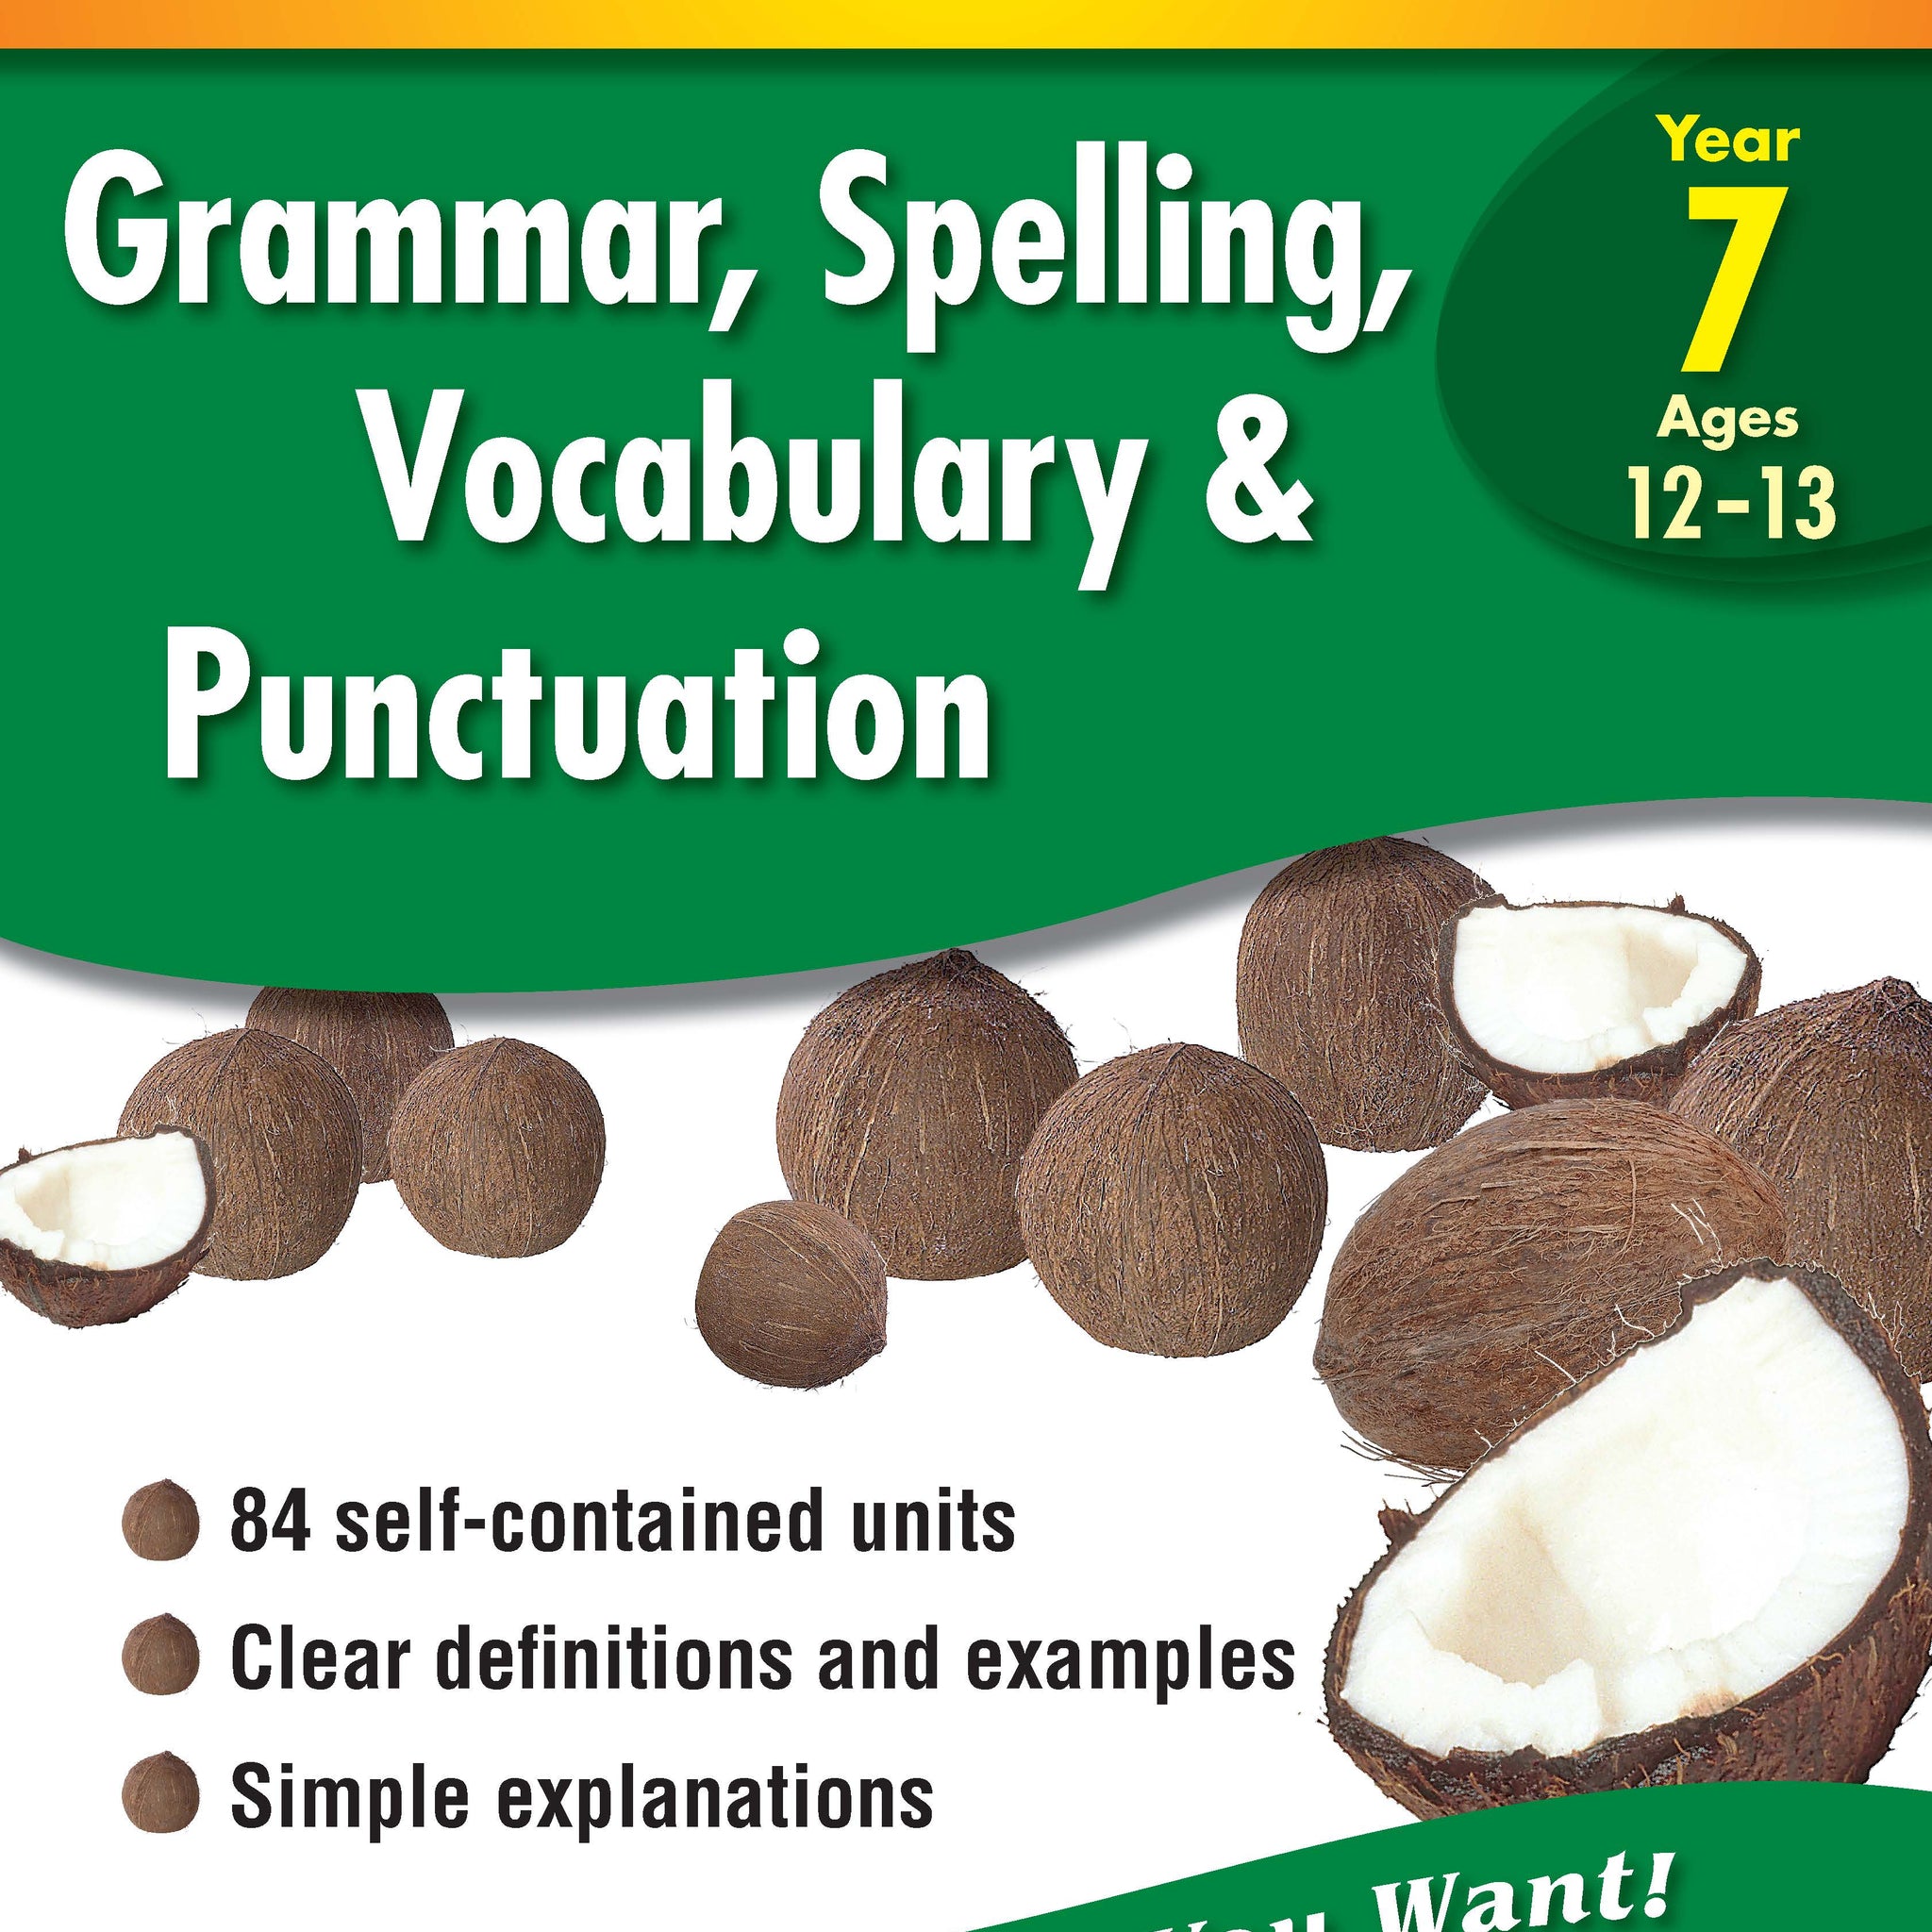 Excel Basic Skills Workbook: Grammar, Spelling, Vocabulary and Punctuation Year 7